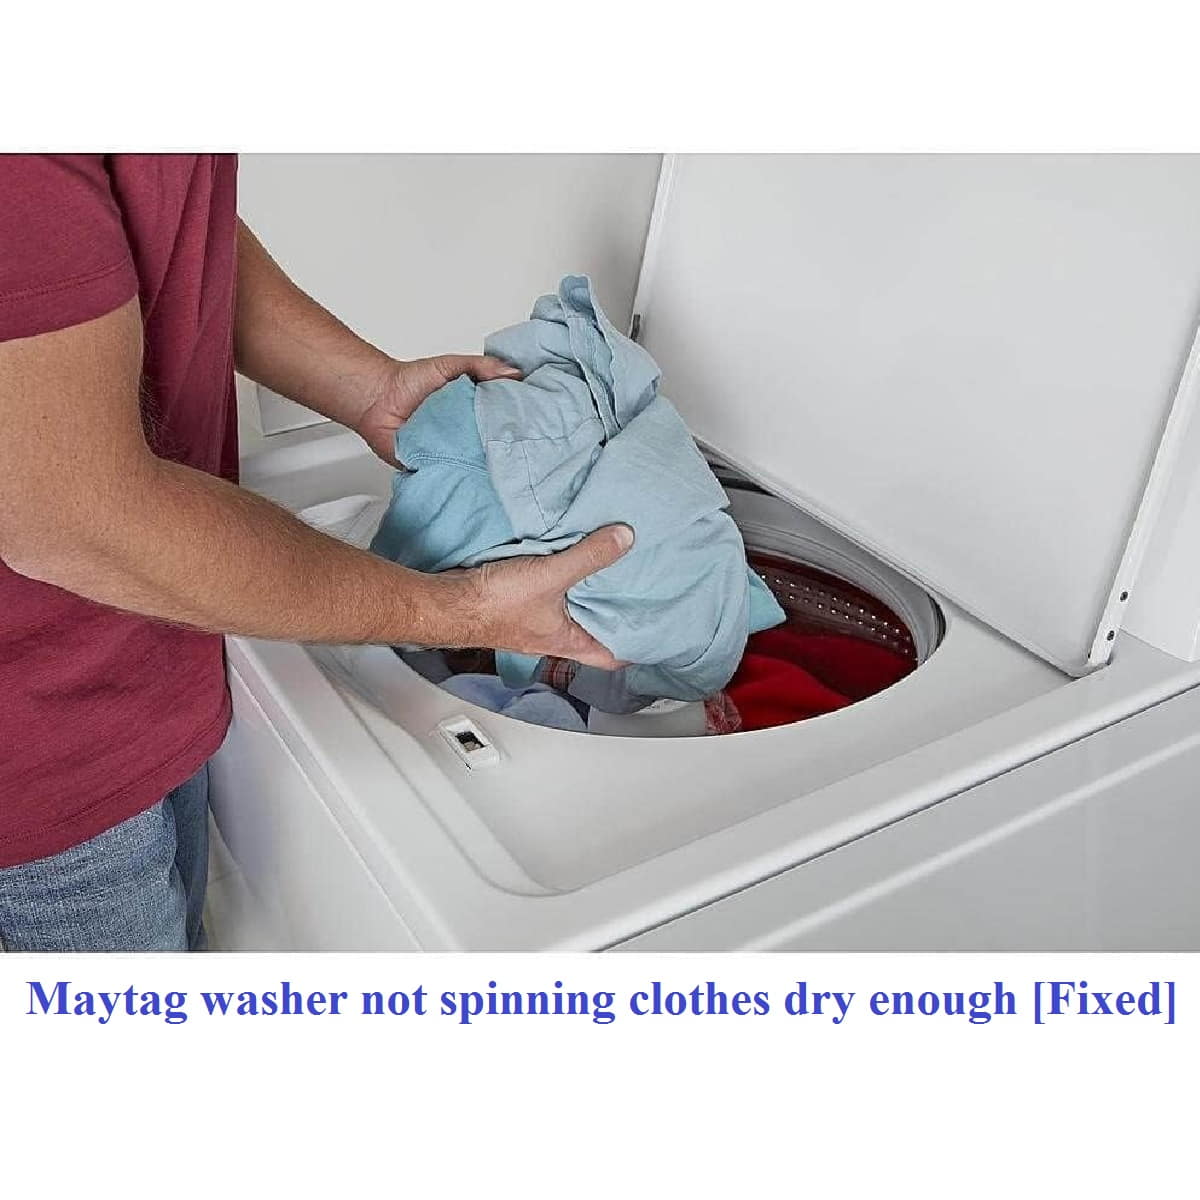 Maytag washer not spinning clothes dry enough